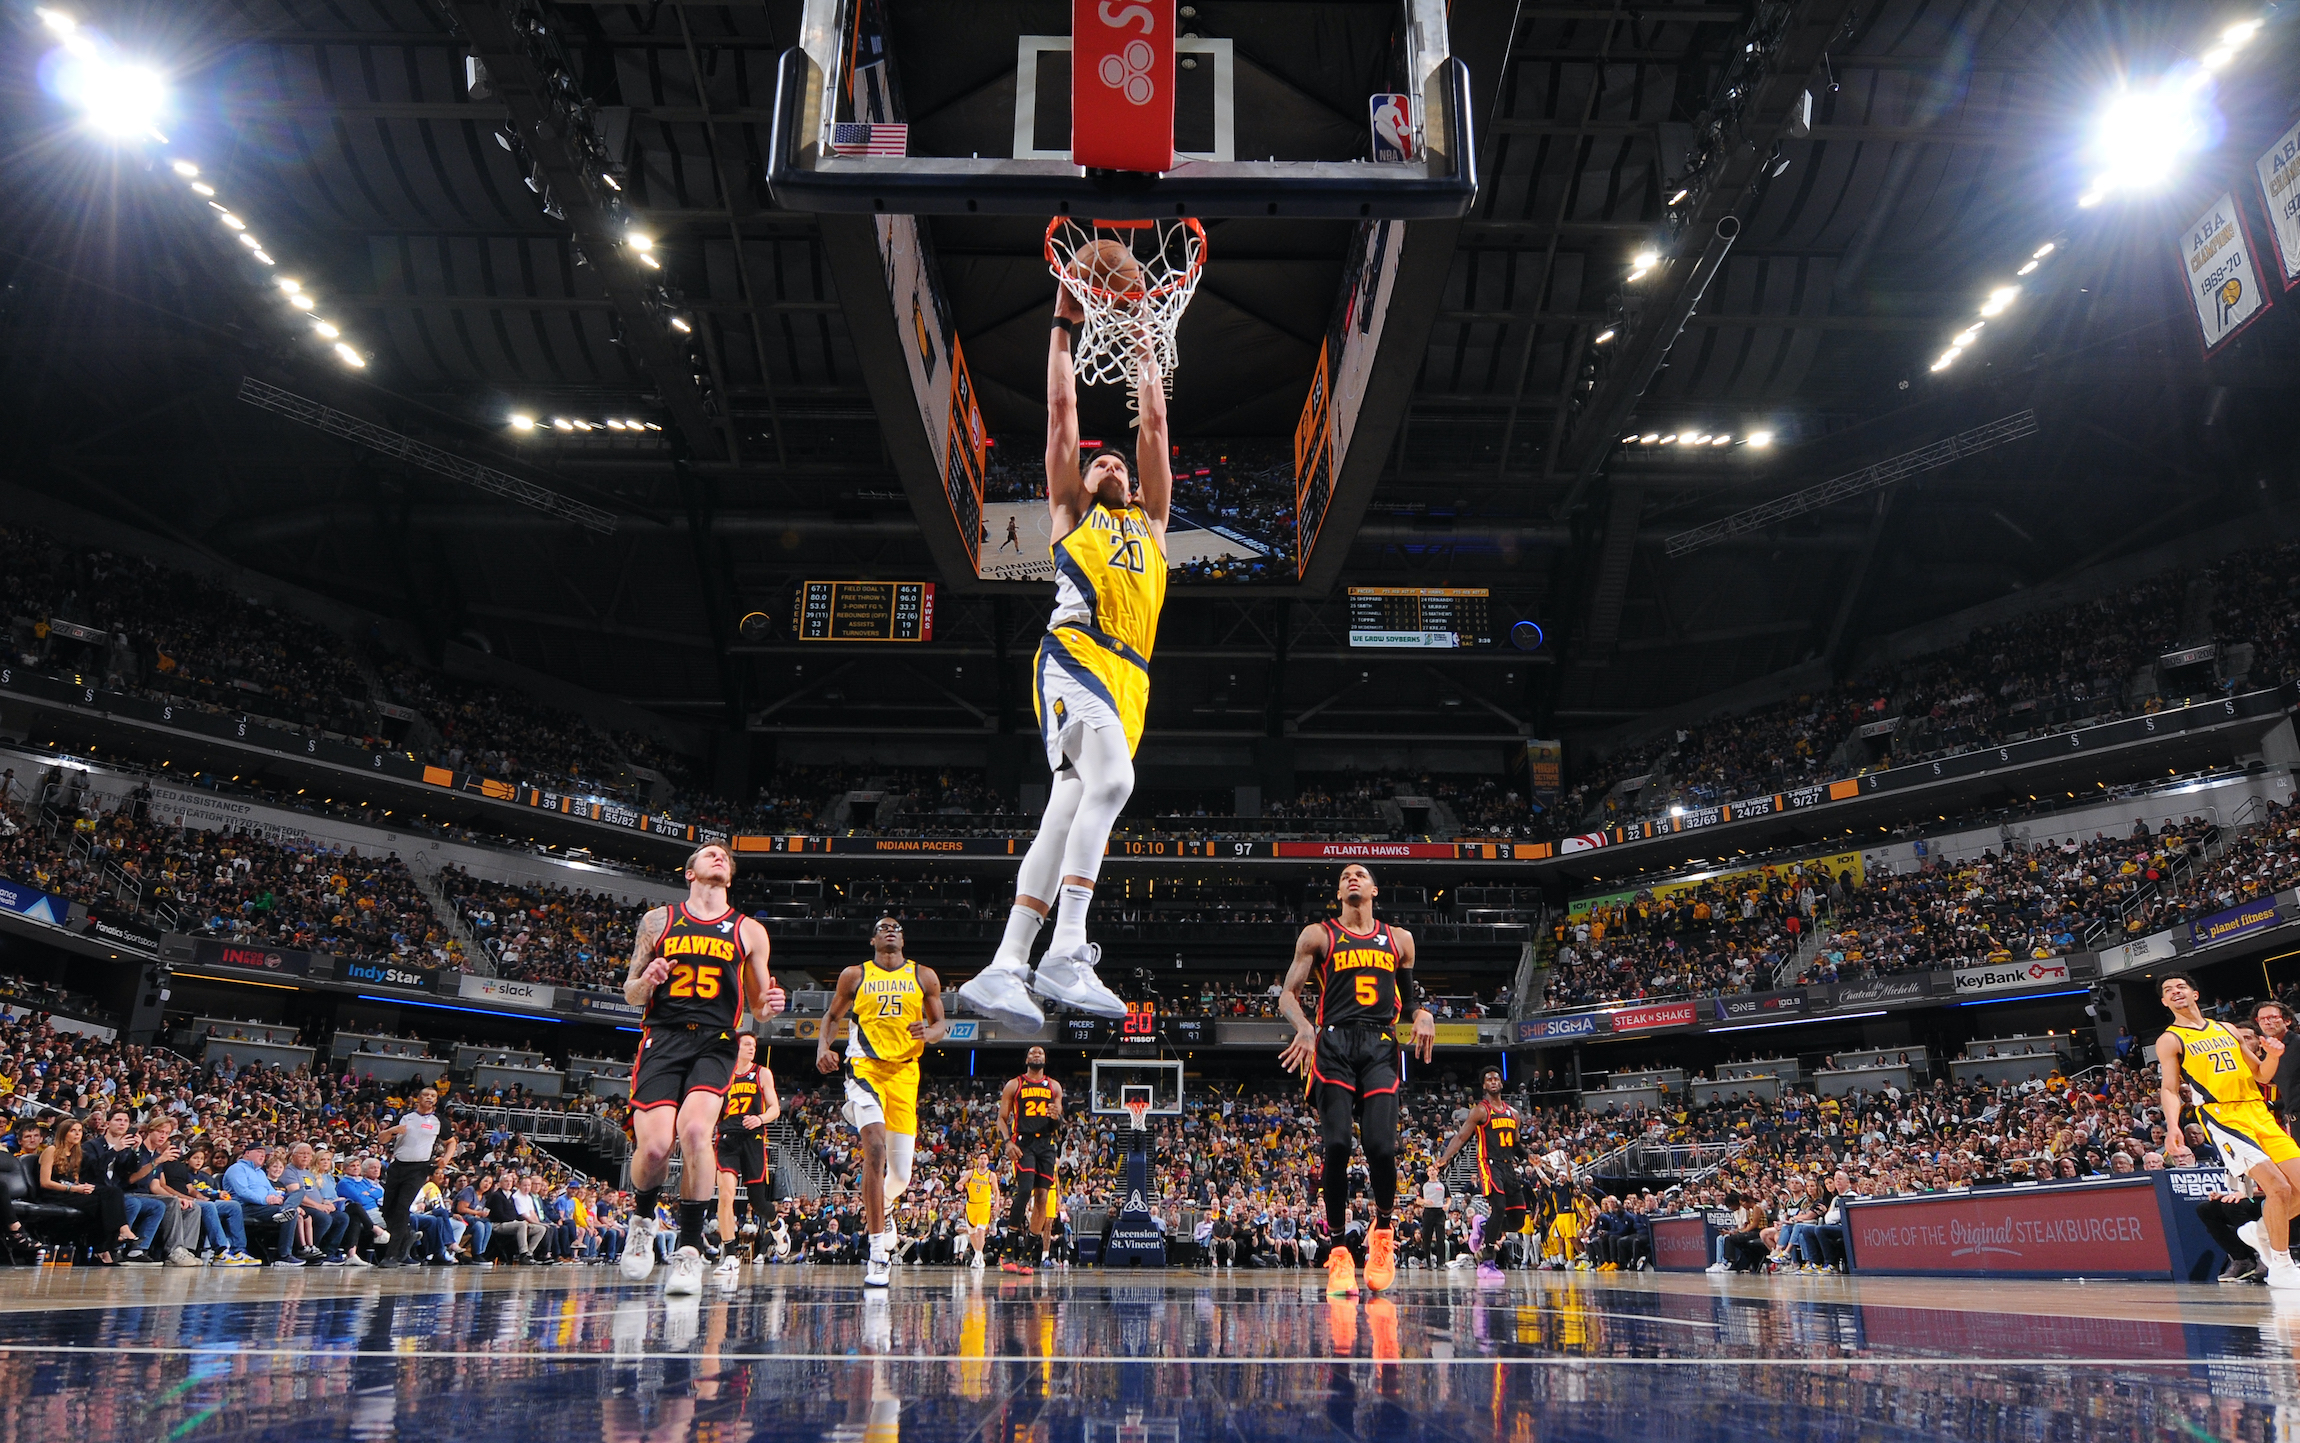 Doug McDermott of the Indiana Pacers dunks during a game against the Atlanta Hawks